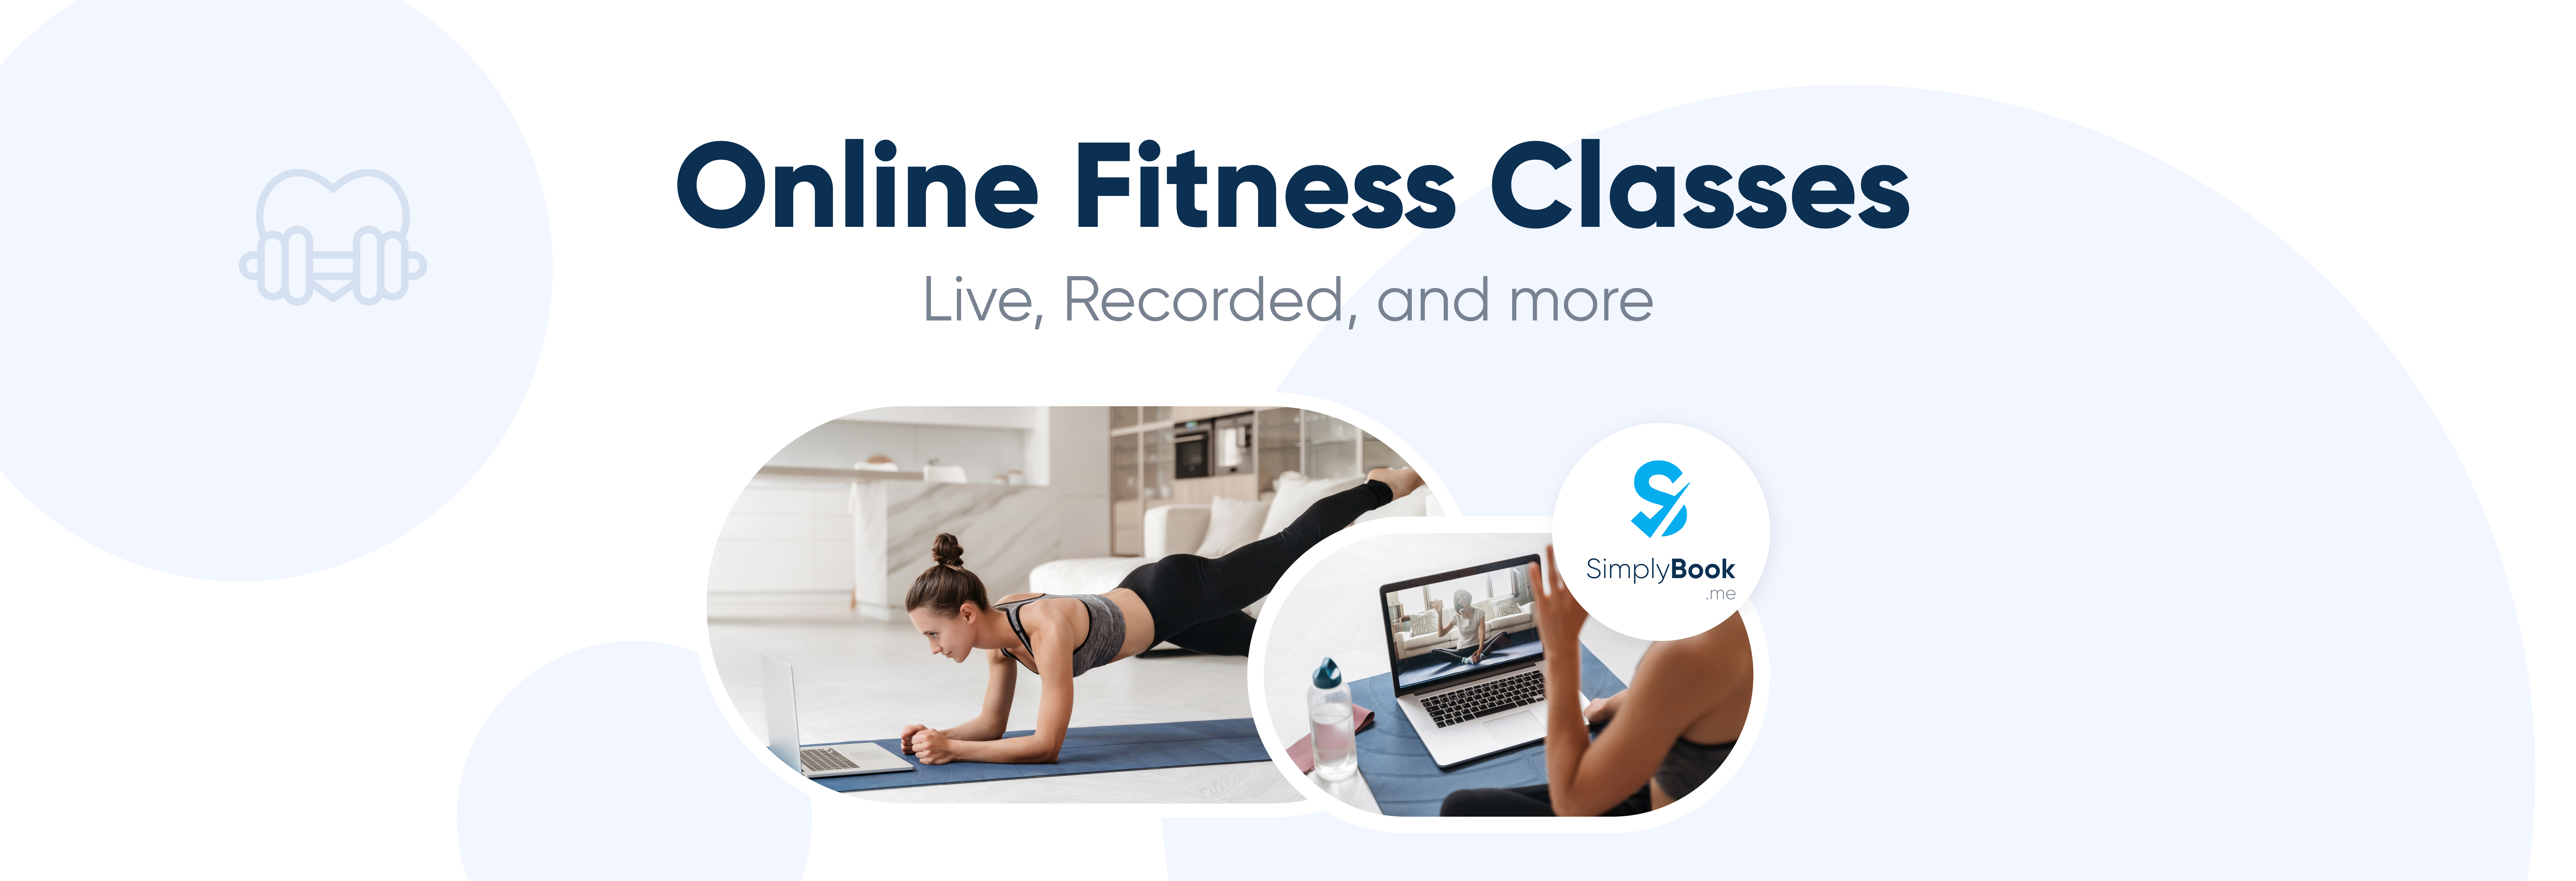 online fitness classes and training programmes